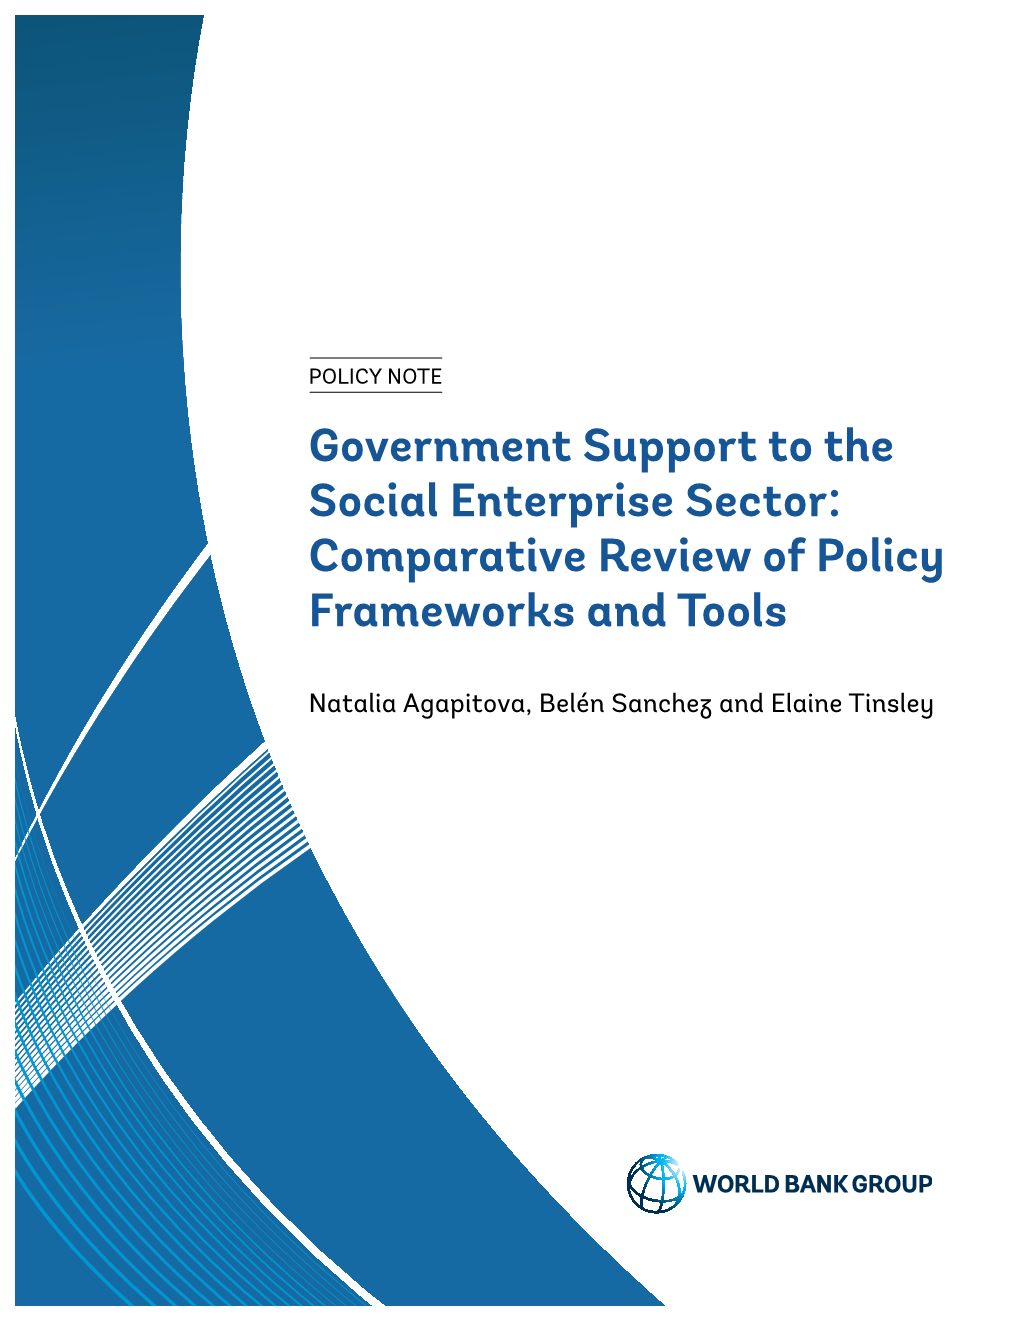 Government Support to the Social Enterprise Sector: Comparative Review of Policy Frameworks and Tools